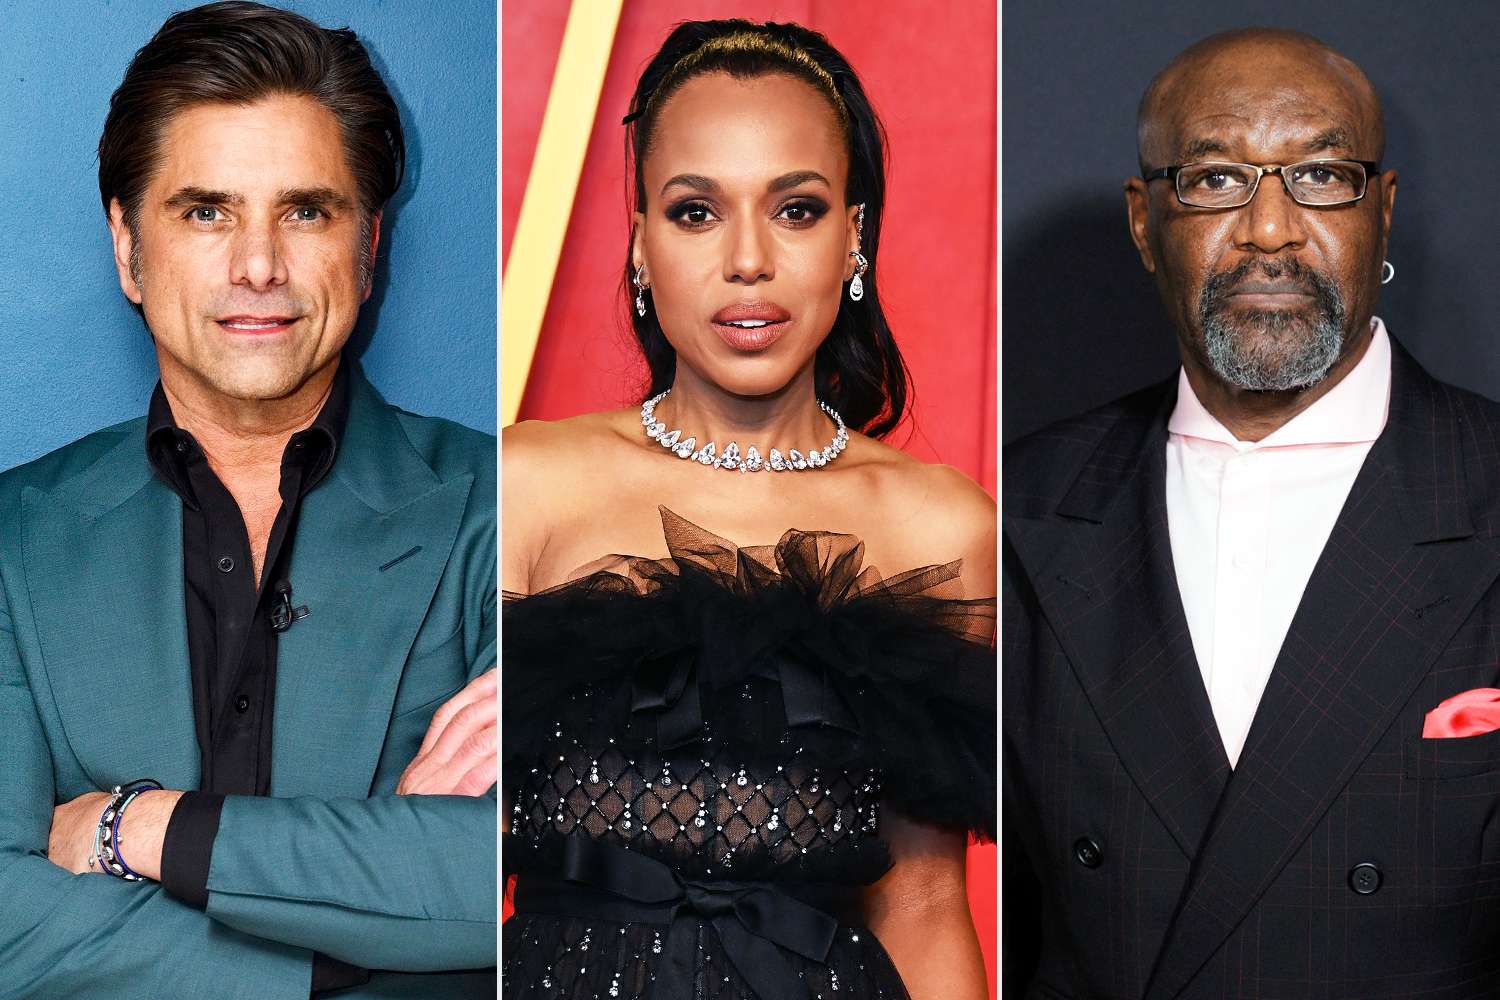 John Stamos to Guest Star on 'UnPrisoned' Alongside Kerry Washington and Delroy Lindo (Exclusive)